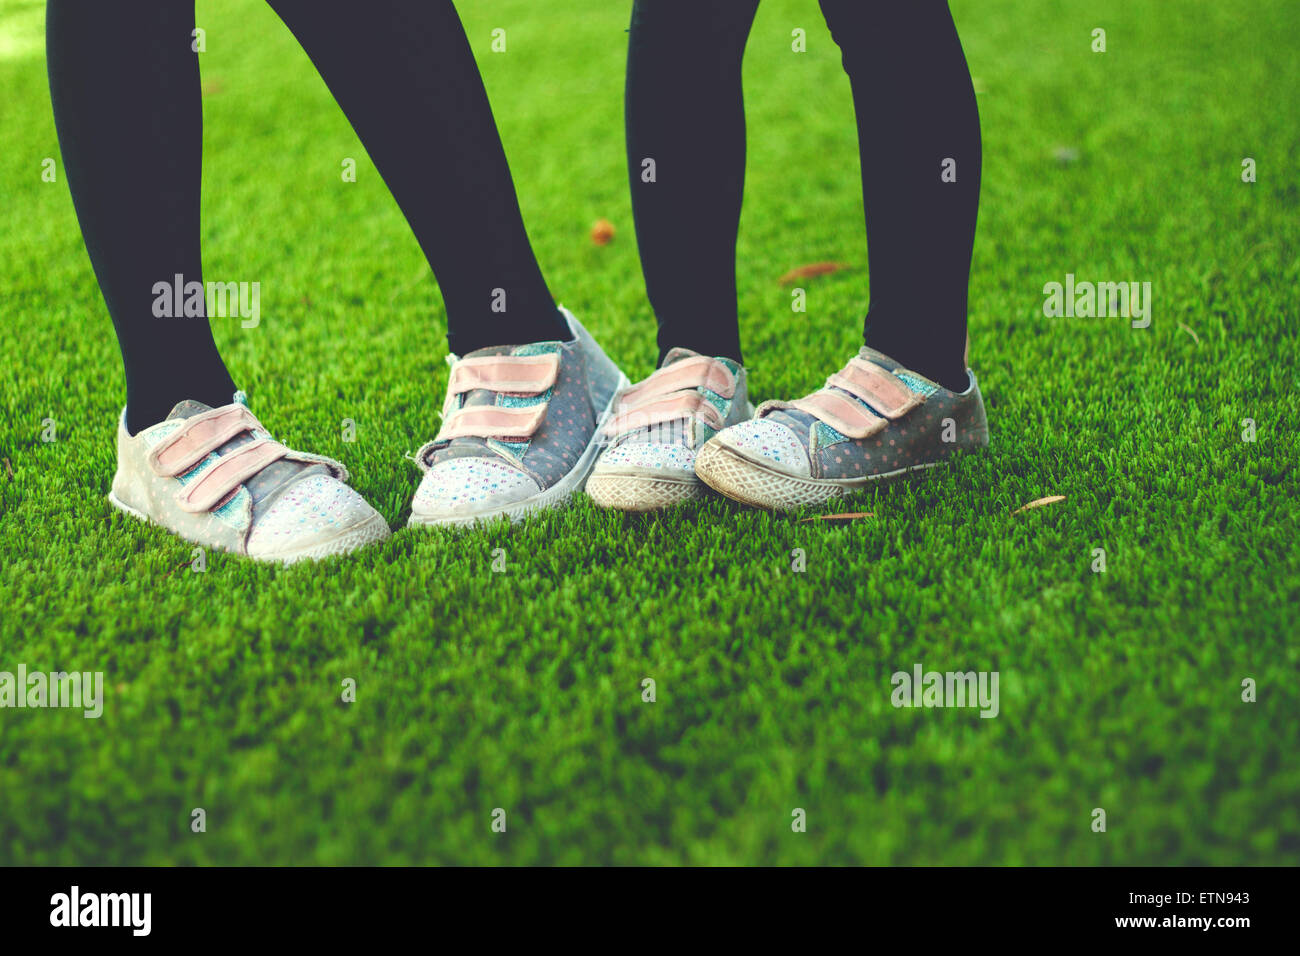 Low section of two girls wearing sneakers Stock Photo